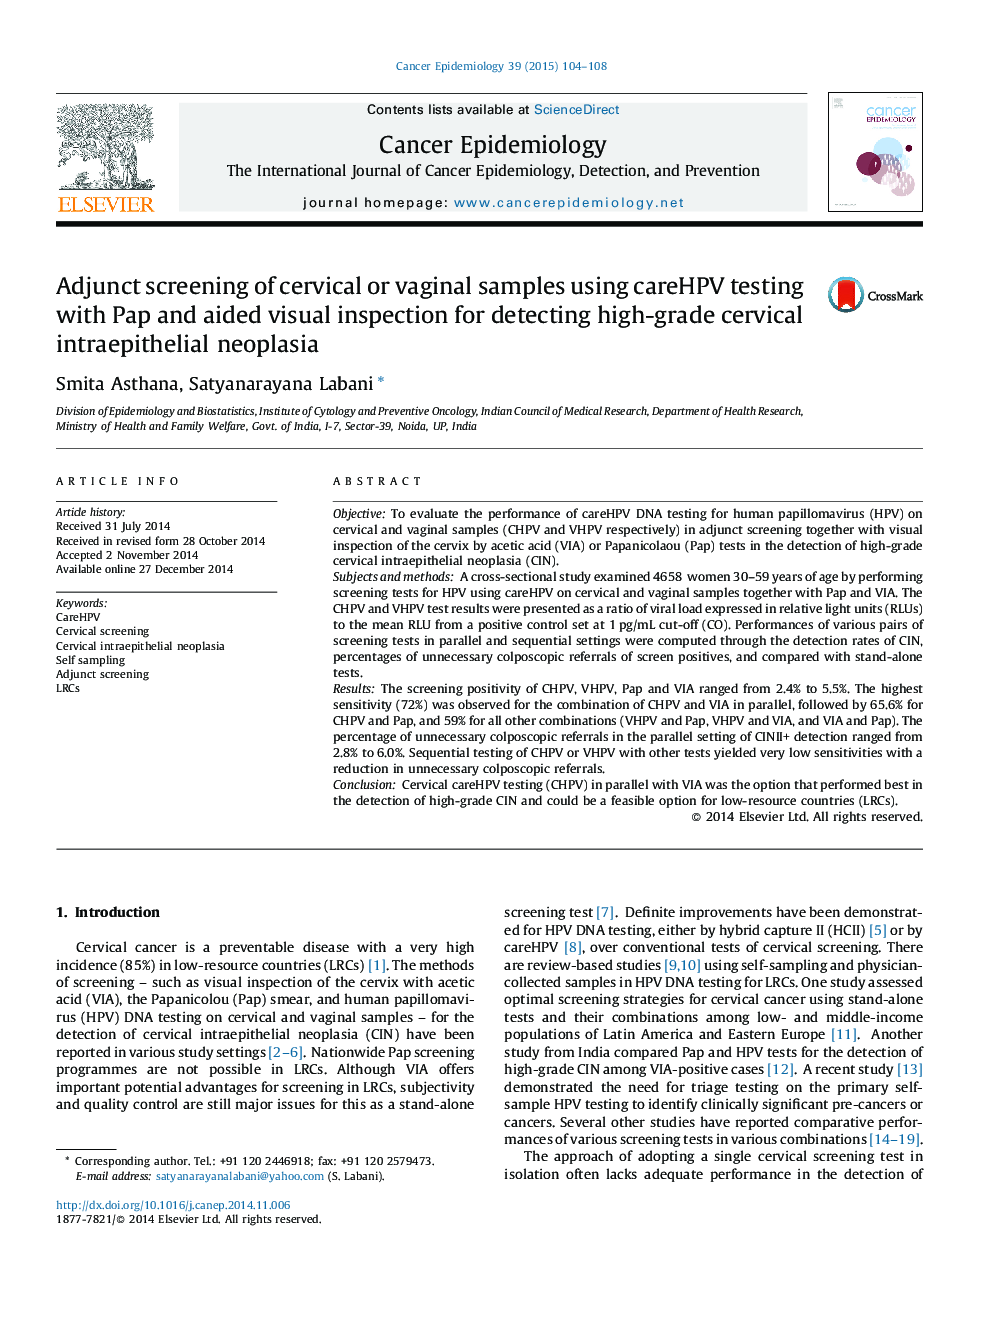 Adjunct screening of cervical or vaginal samples using careHPV testing with Pap and aided visual inspection for detecting high-grade cervical intraepithelial neoplasia